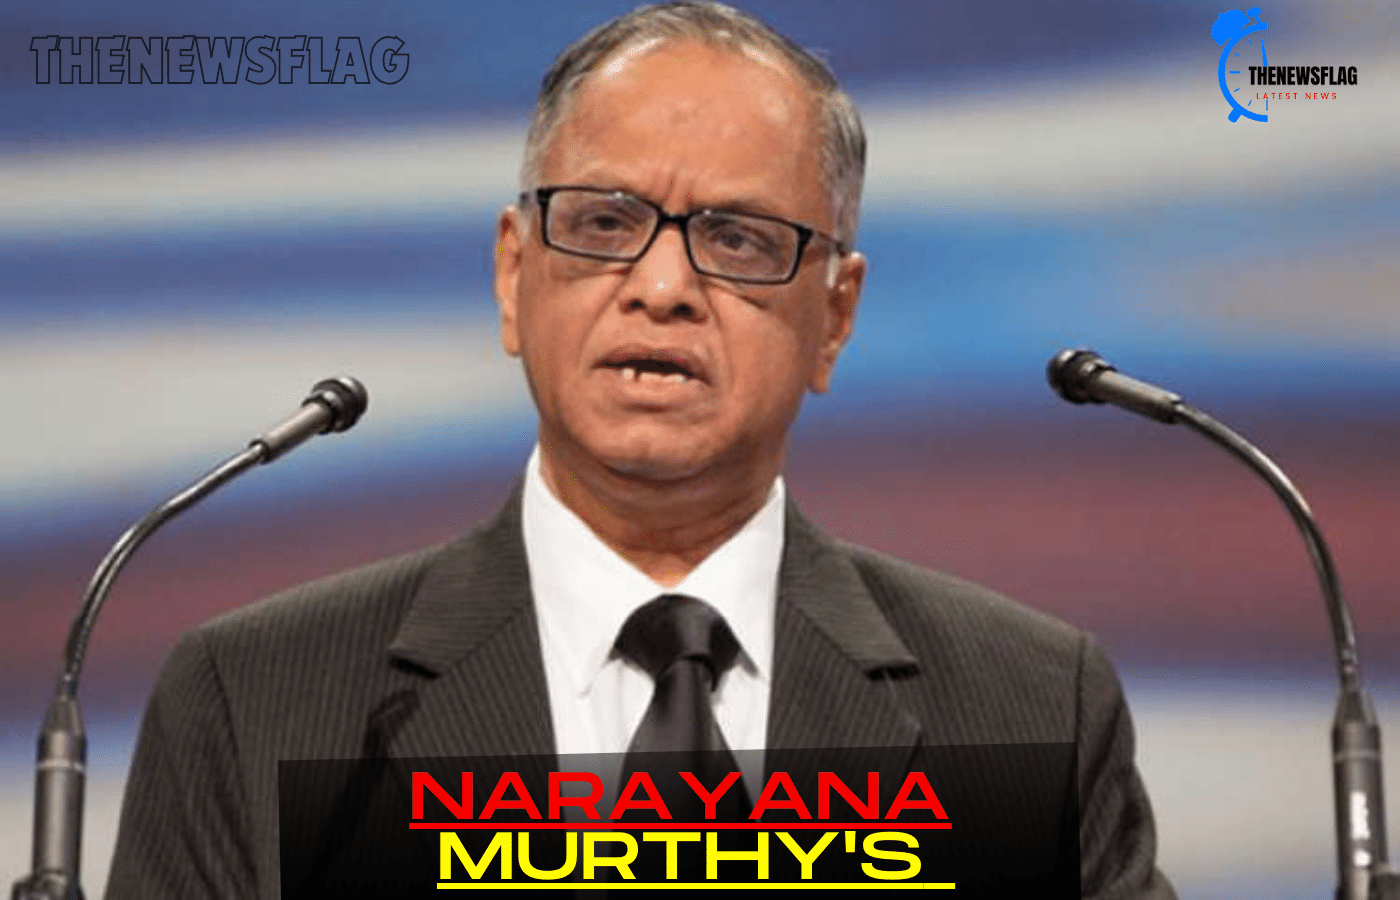 With 15 lakh shares to his name, Narayana Murthy's 4-month-old grandson becomes India's youngest millionaire.